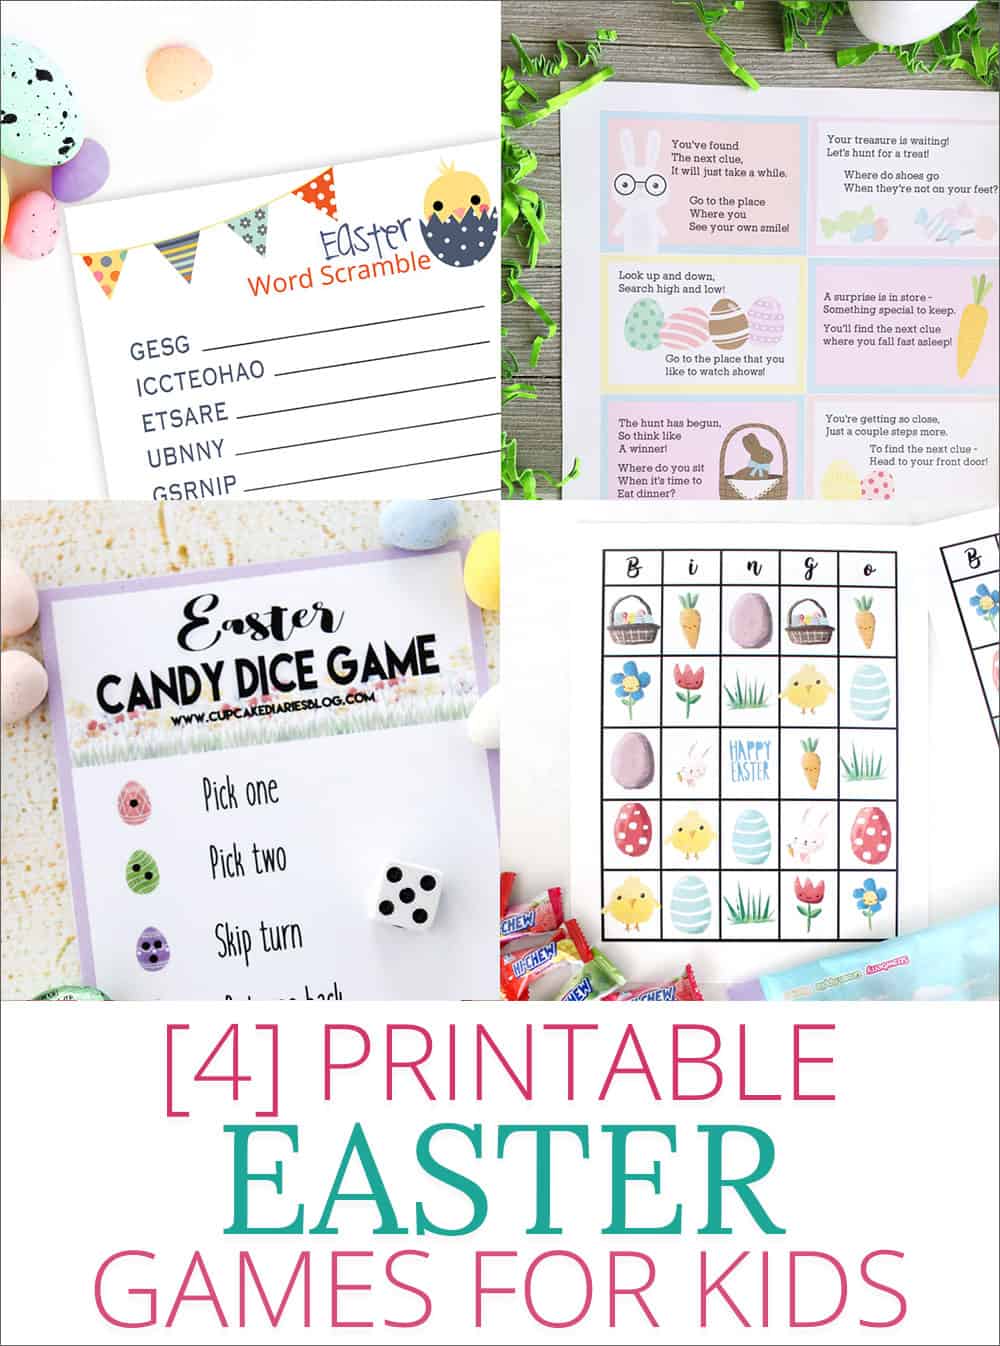 4 Fun and Free Printable Easter Games for Kids -- Easter Word Scramble, Easter Scavenger Hunt, Easter Dice Game and Easter Bingo! overthebigmoon.com!